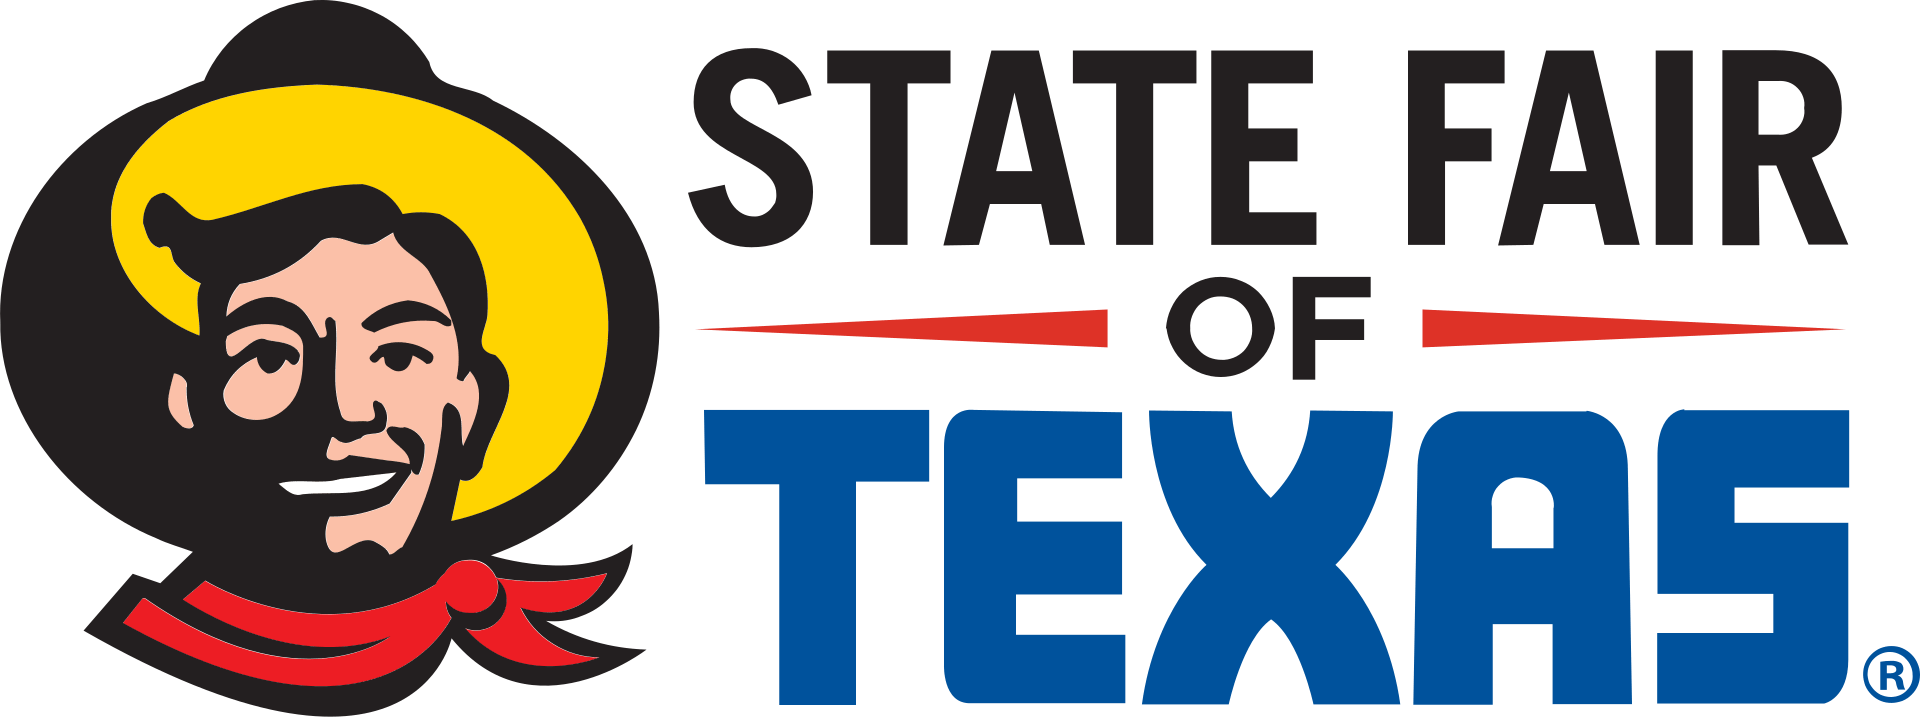 the logo for the State Fair of Texas